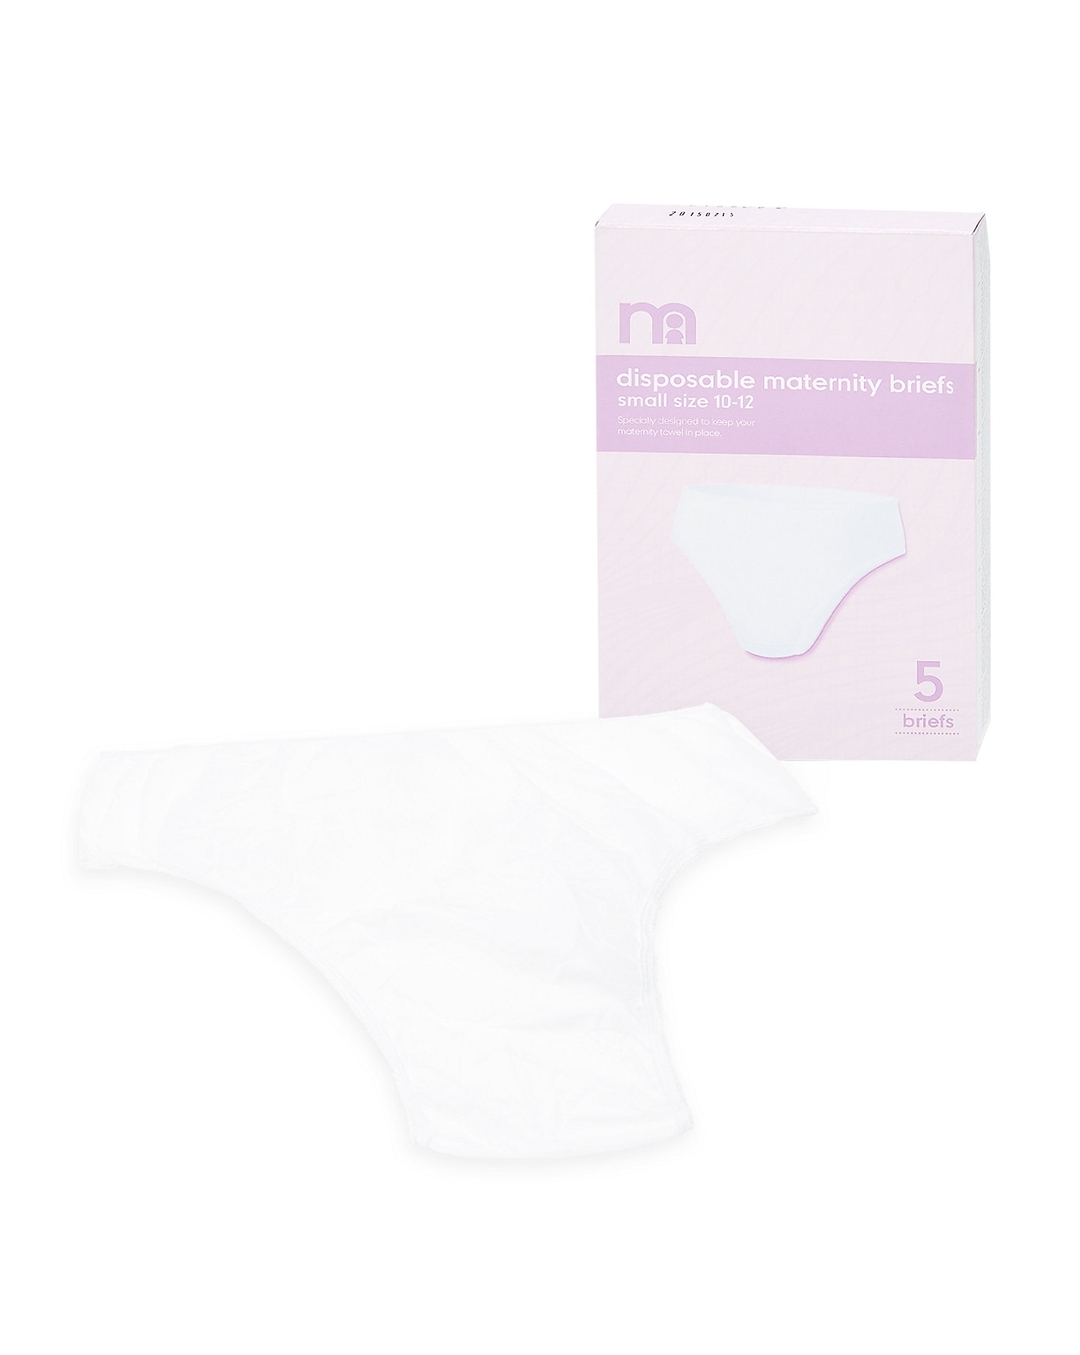 Mothercare Disposable Maternity Briefs White Small - 5 Pcs|1052326